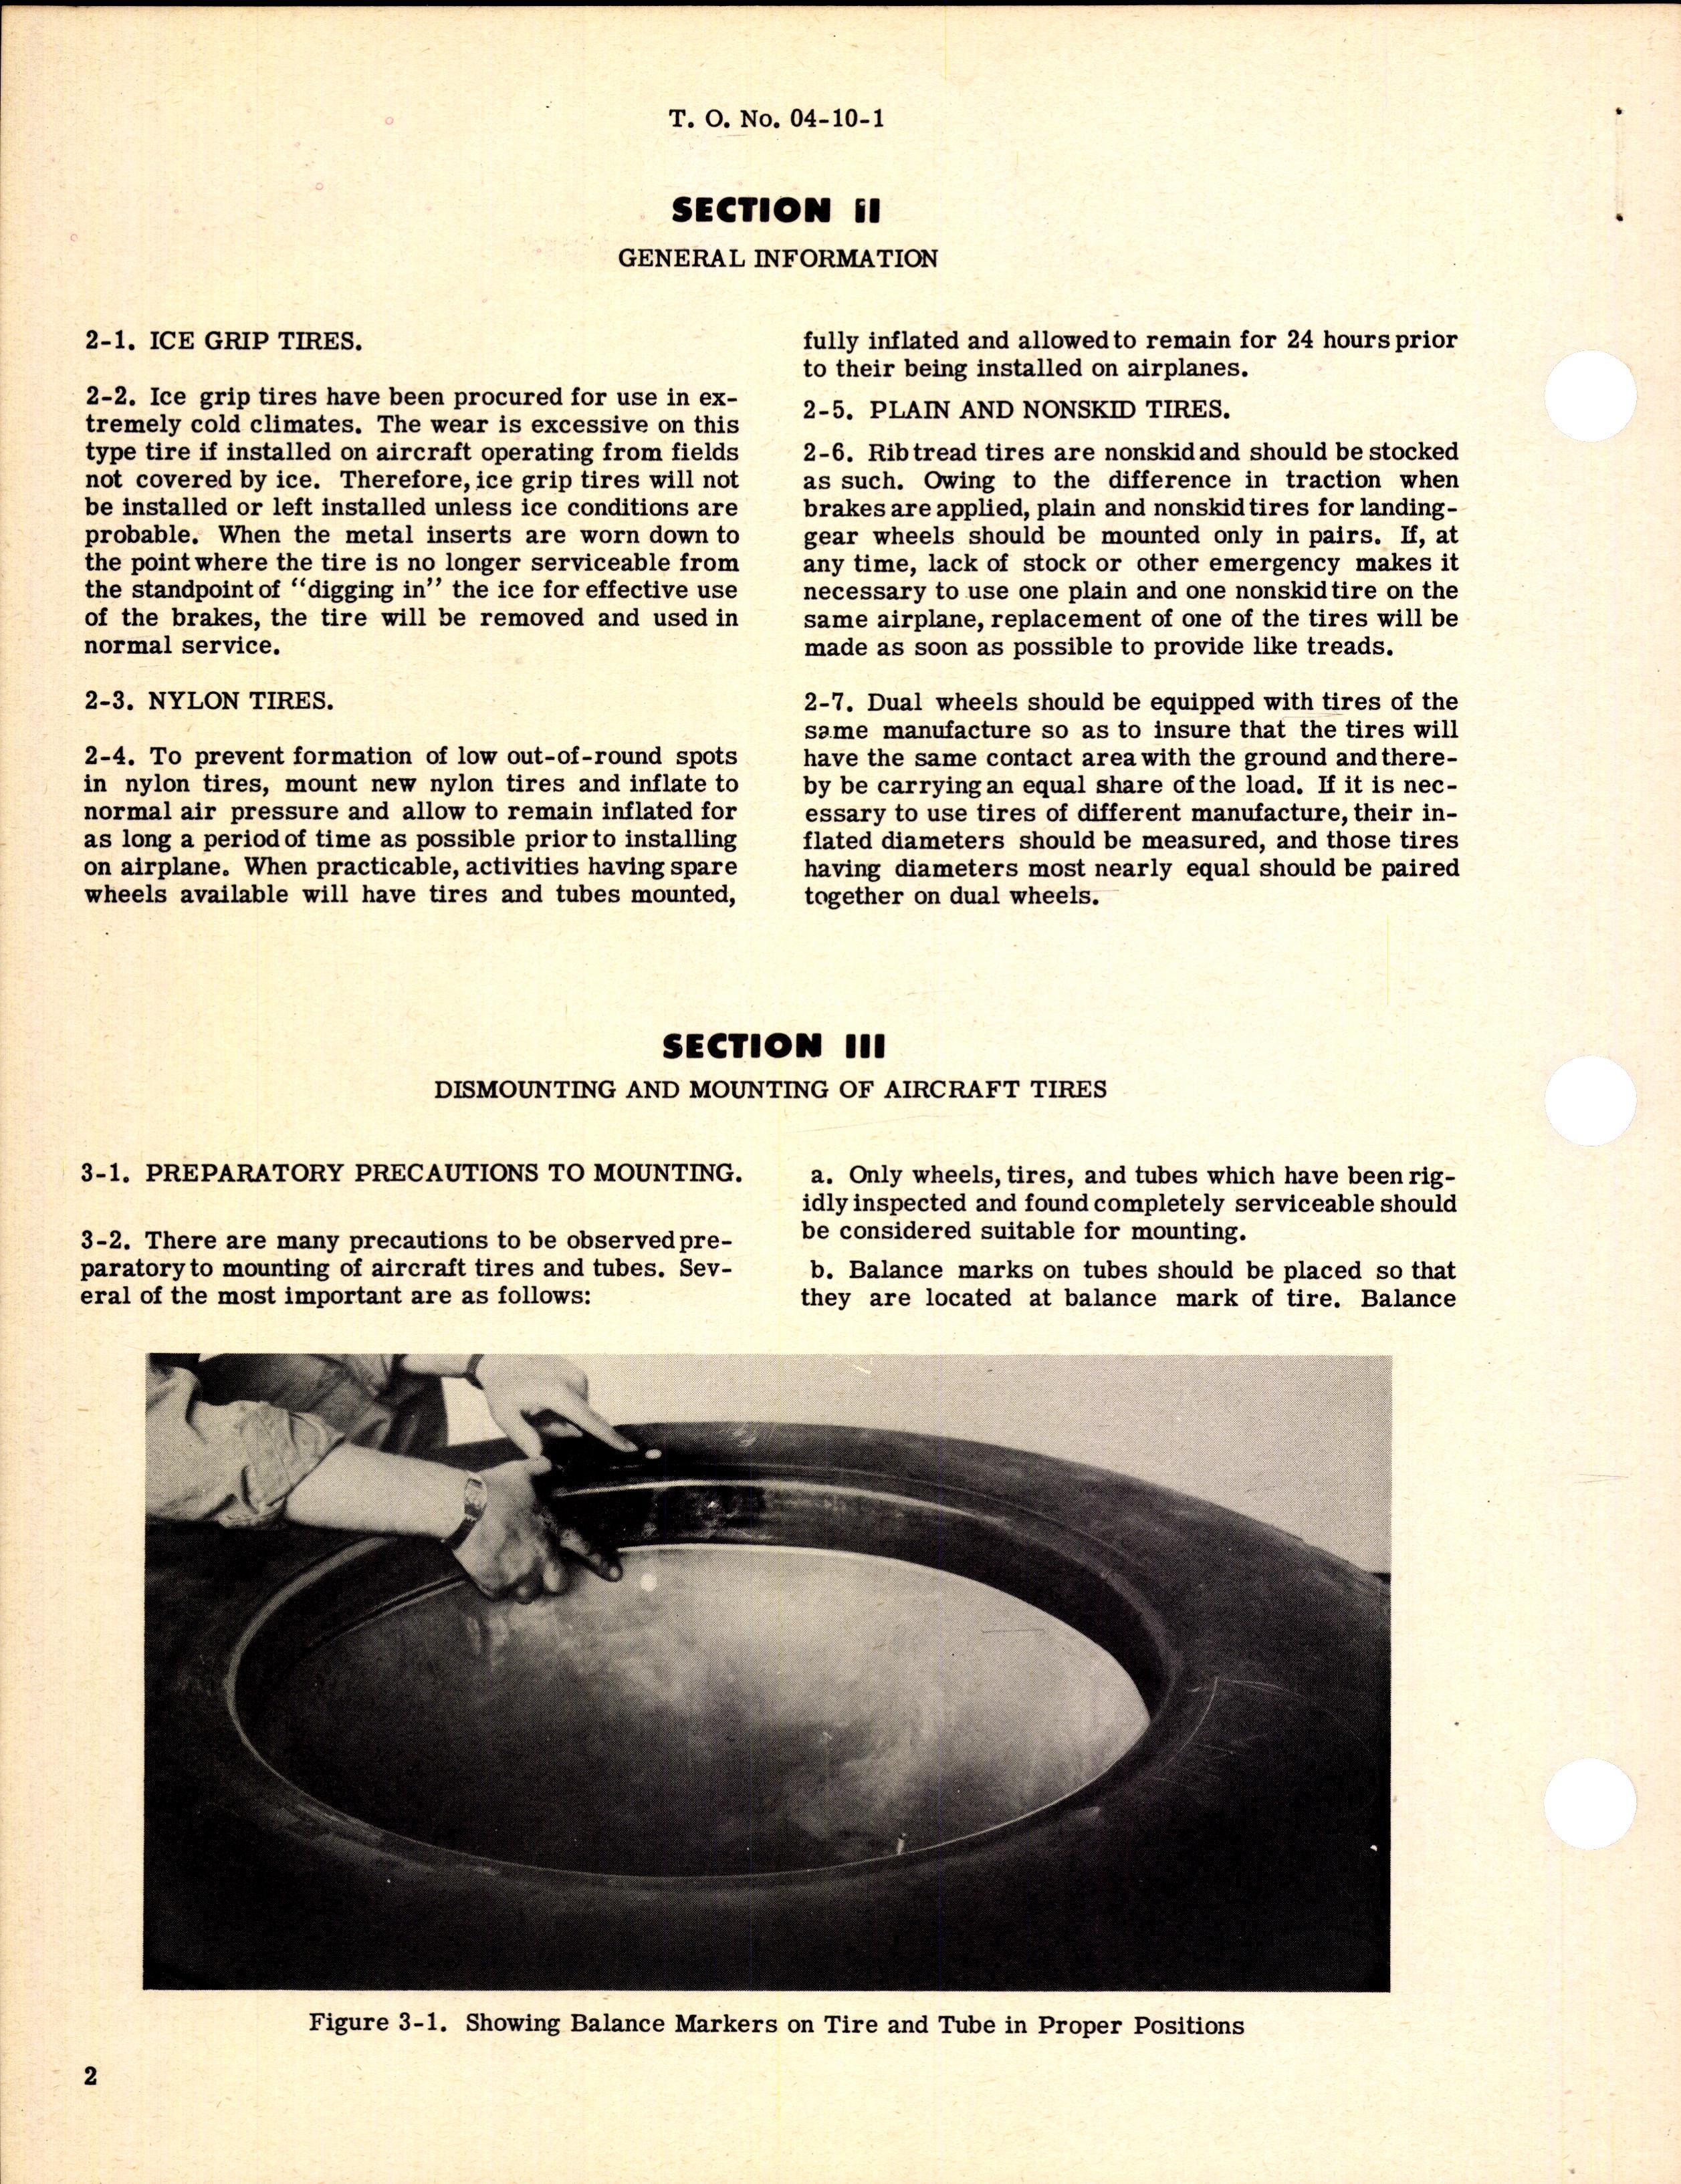 Sample page 4 from AirCorps Library document: Dismounting, Mounting, and Inflation of Aircraft Tires and Tubes